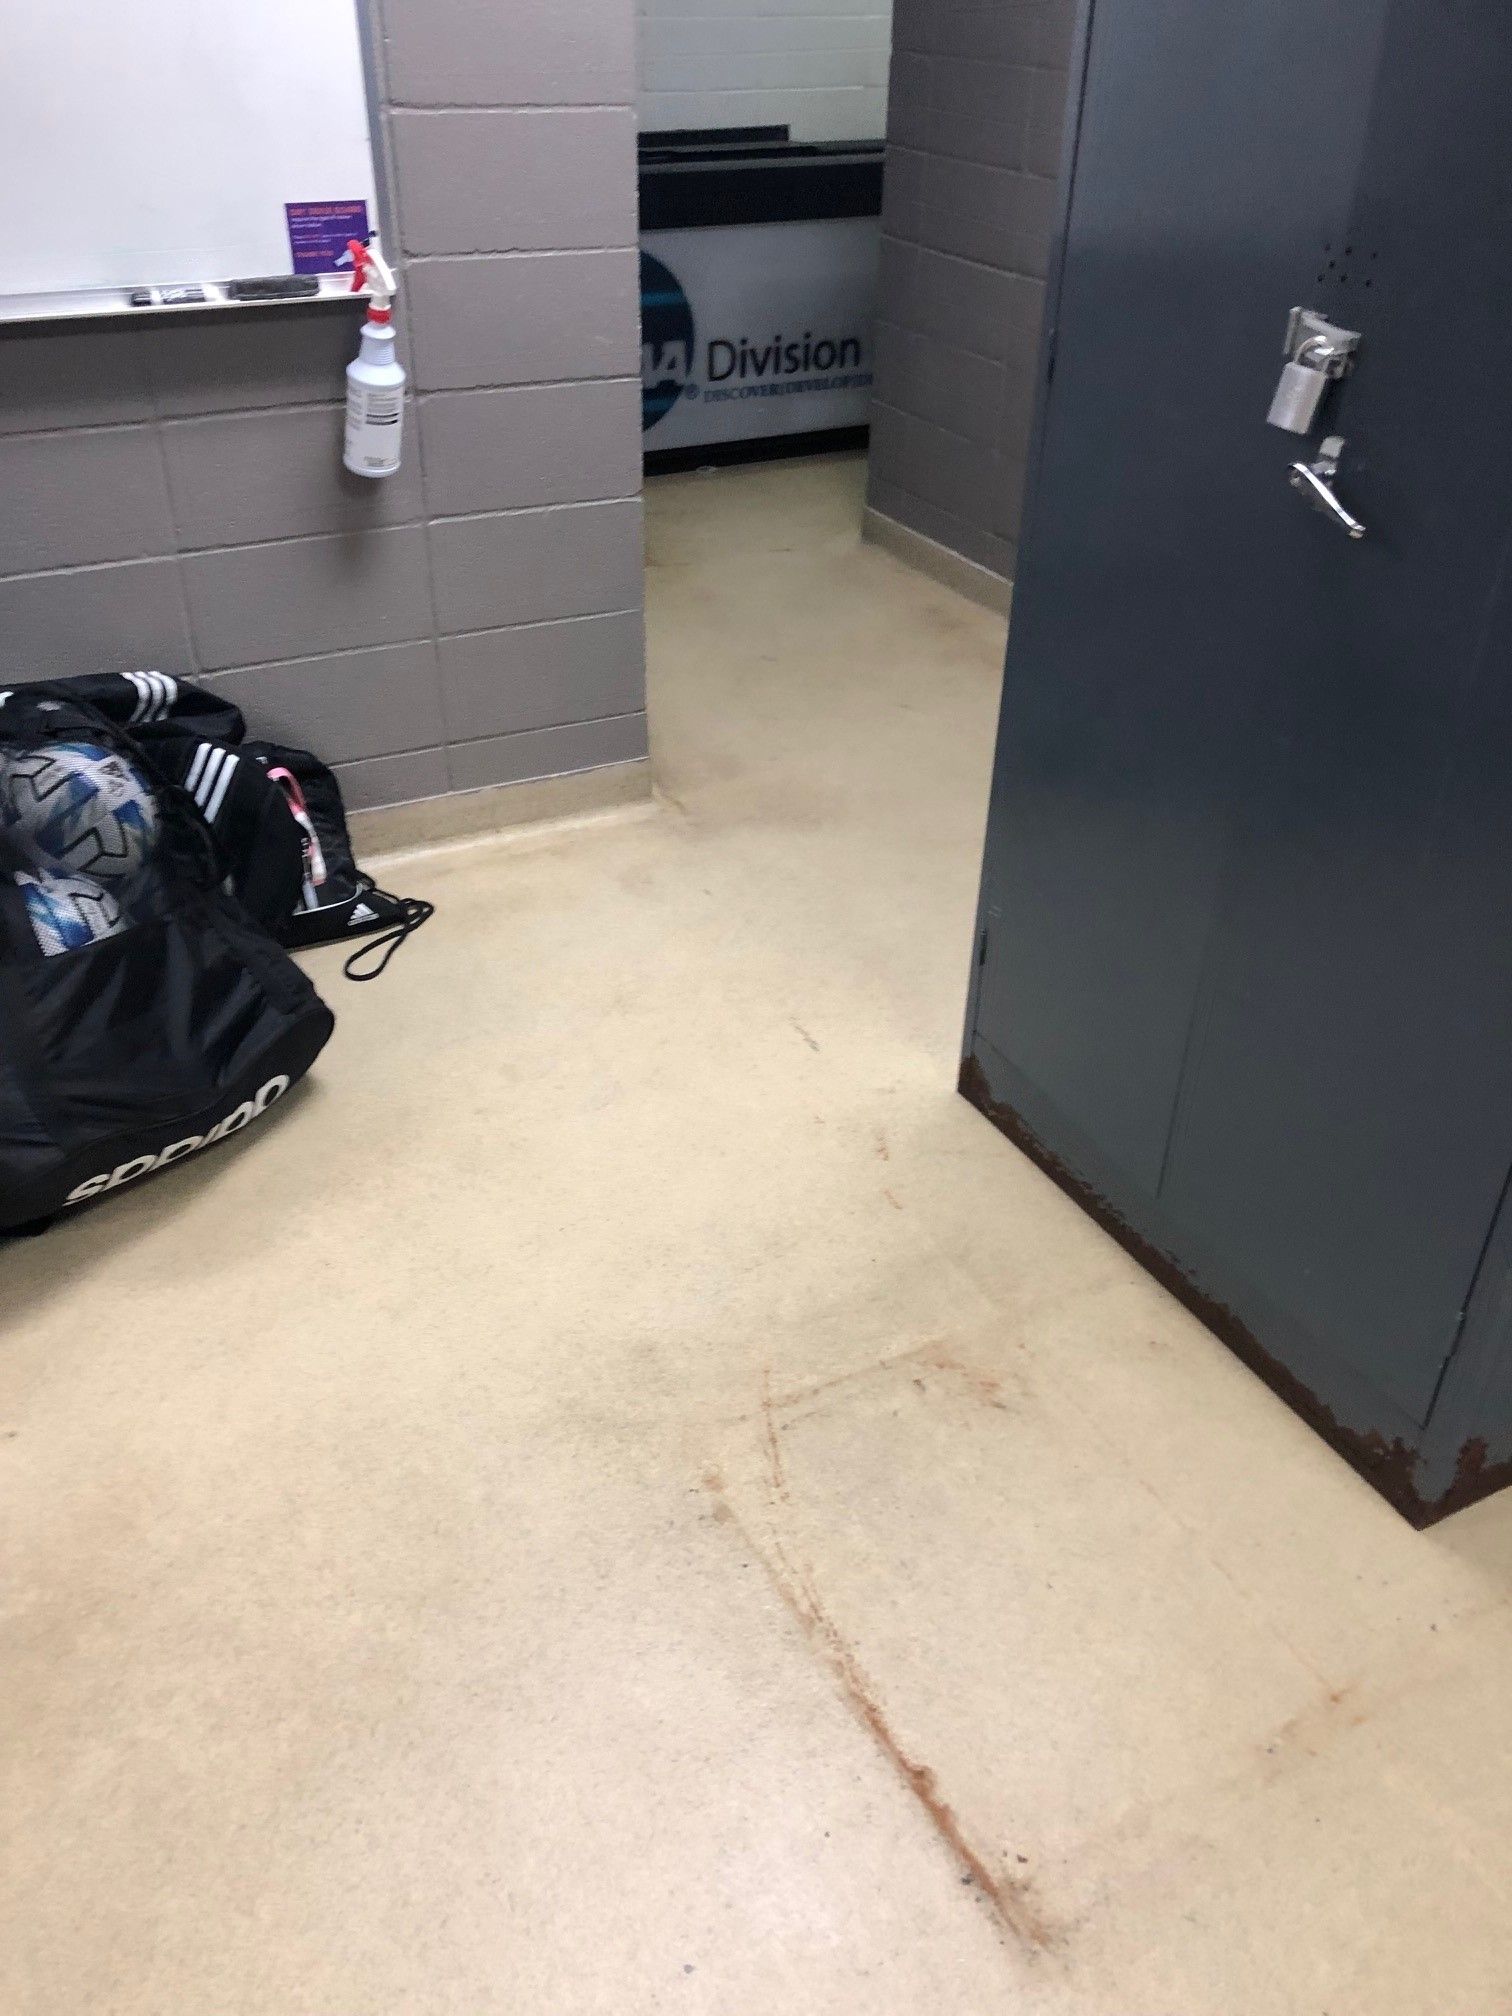 A room with a dirty floor and a bag on the floor.